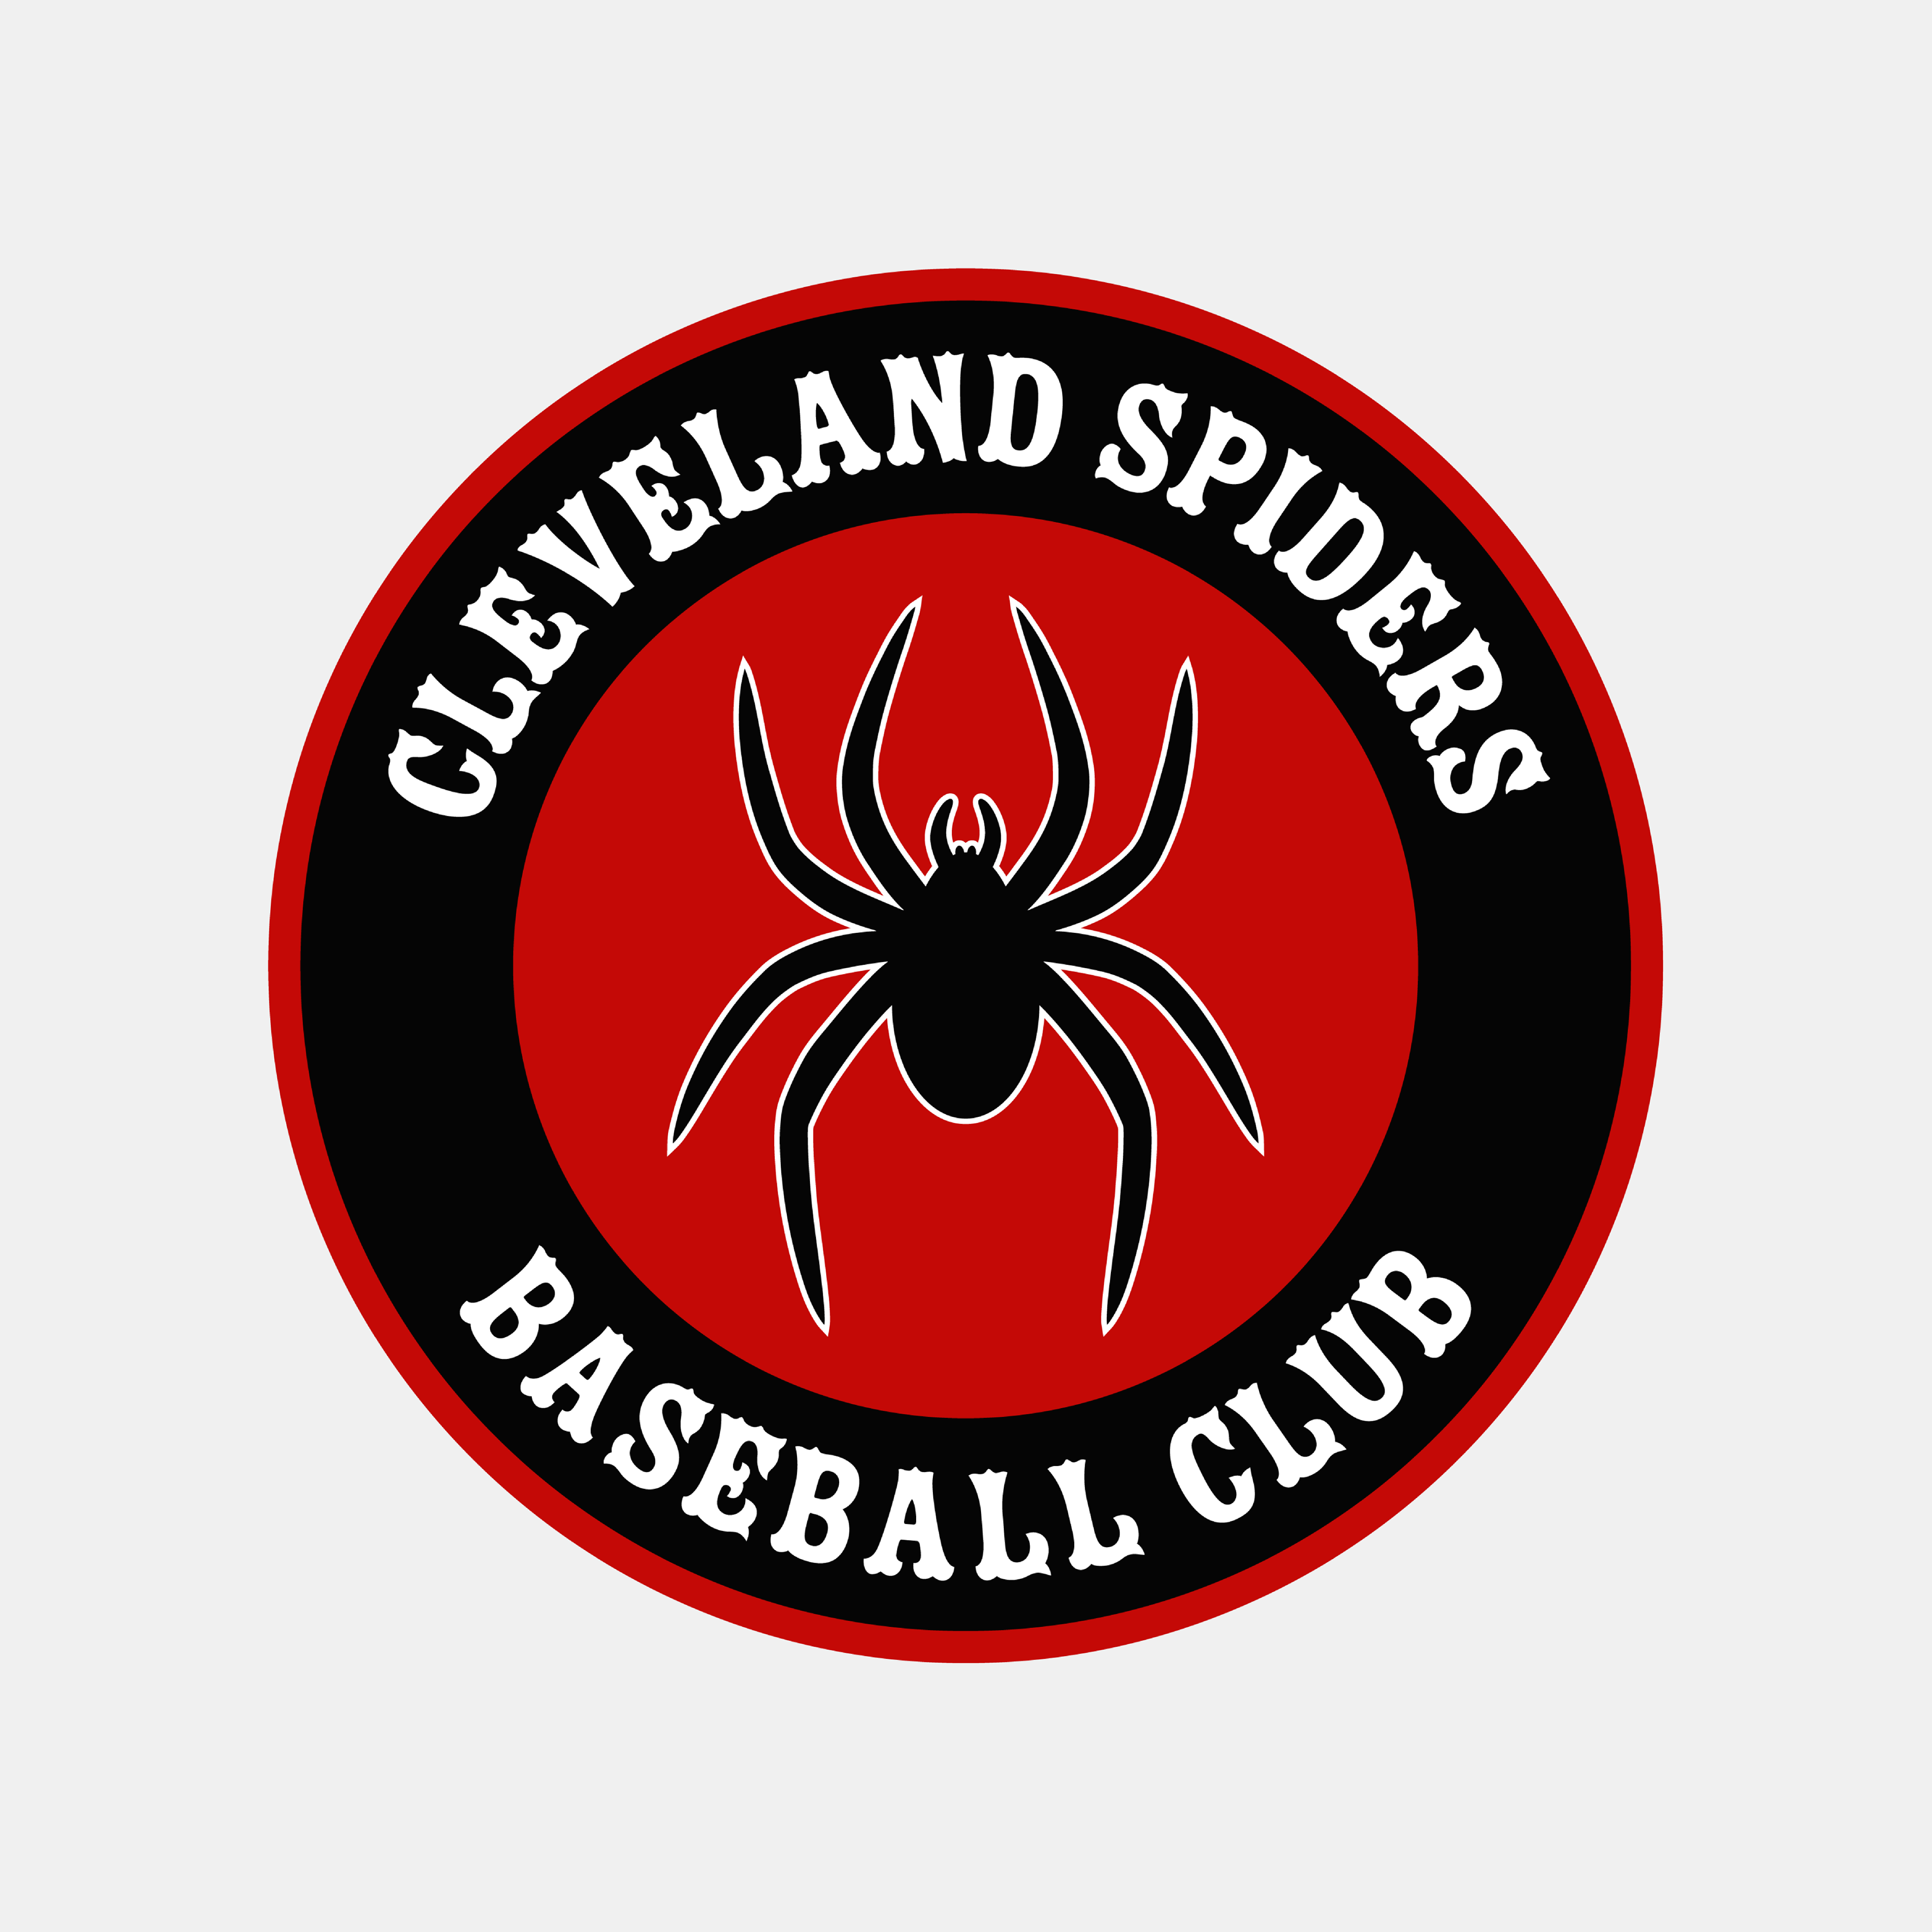 UNOFFICiAL ATHLETIC  Cleveland Spiders (Indians) Rebrand